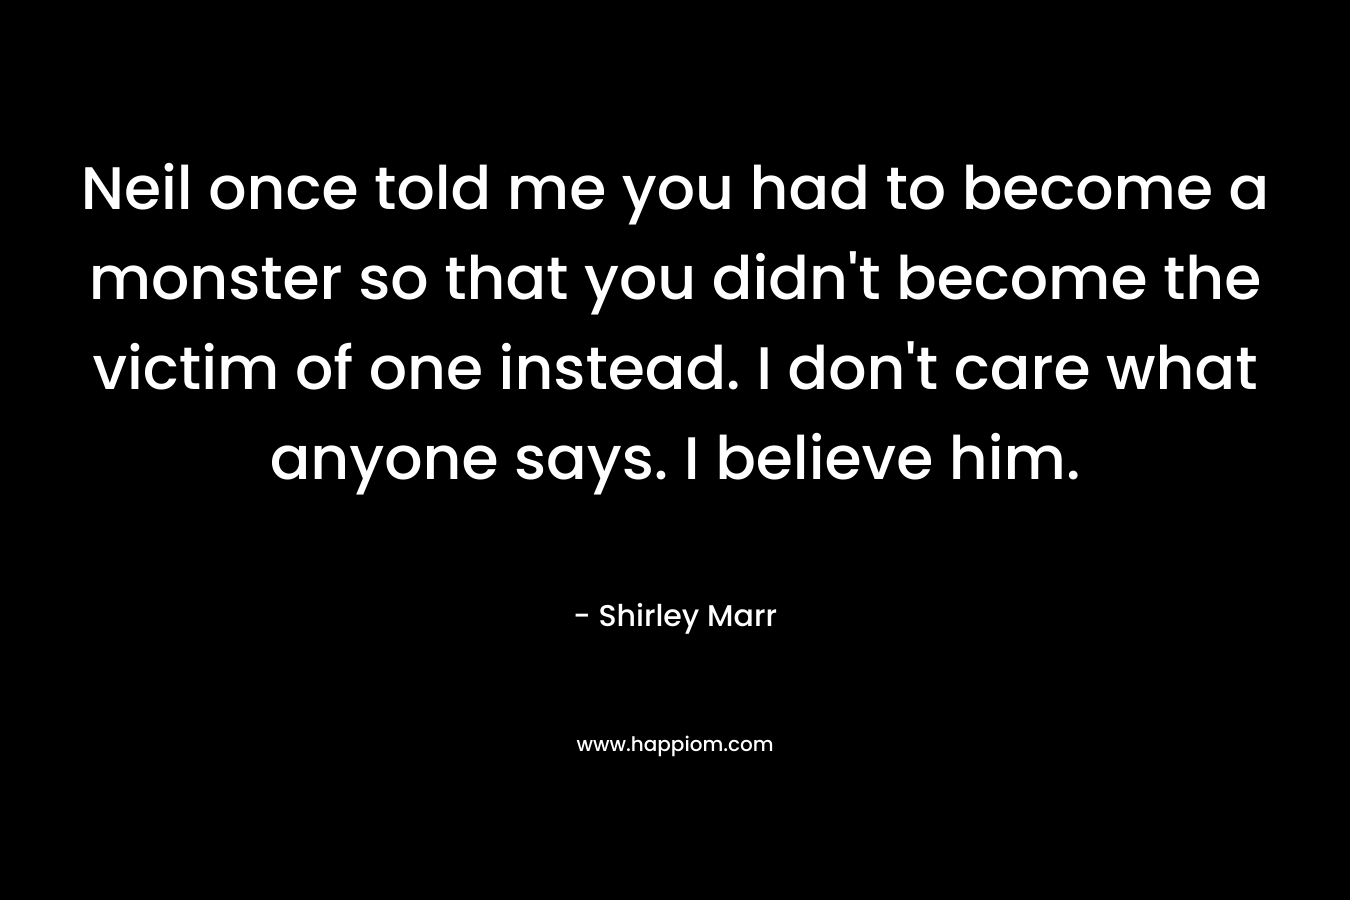 Neil once told me you had to become a monster so that you didn’t become the victim of one instead. I don’t care what anyone says. I believe him. – Shirley Marr